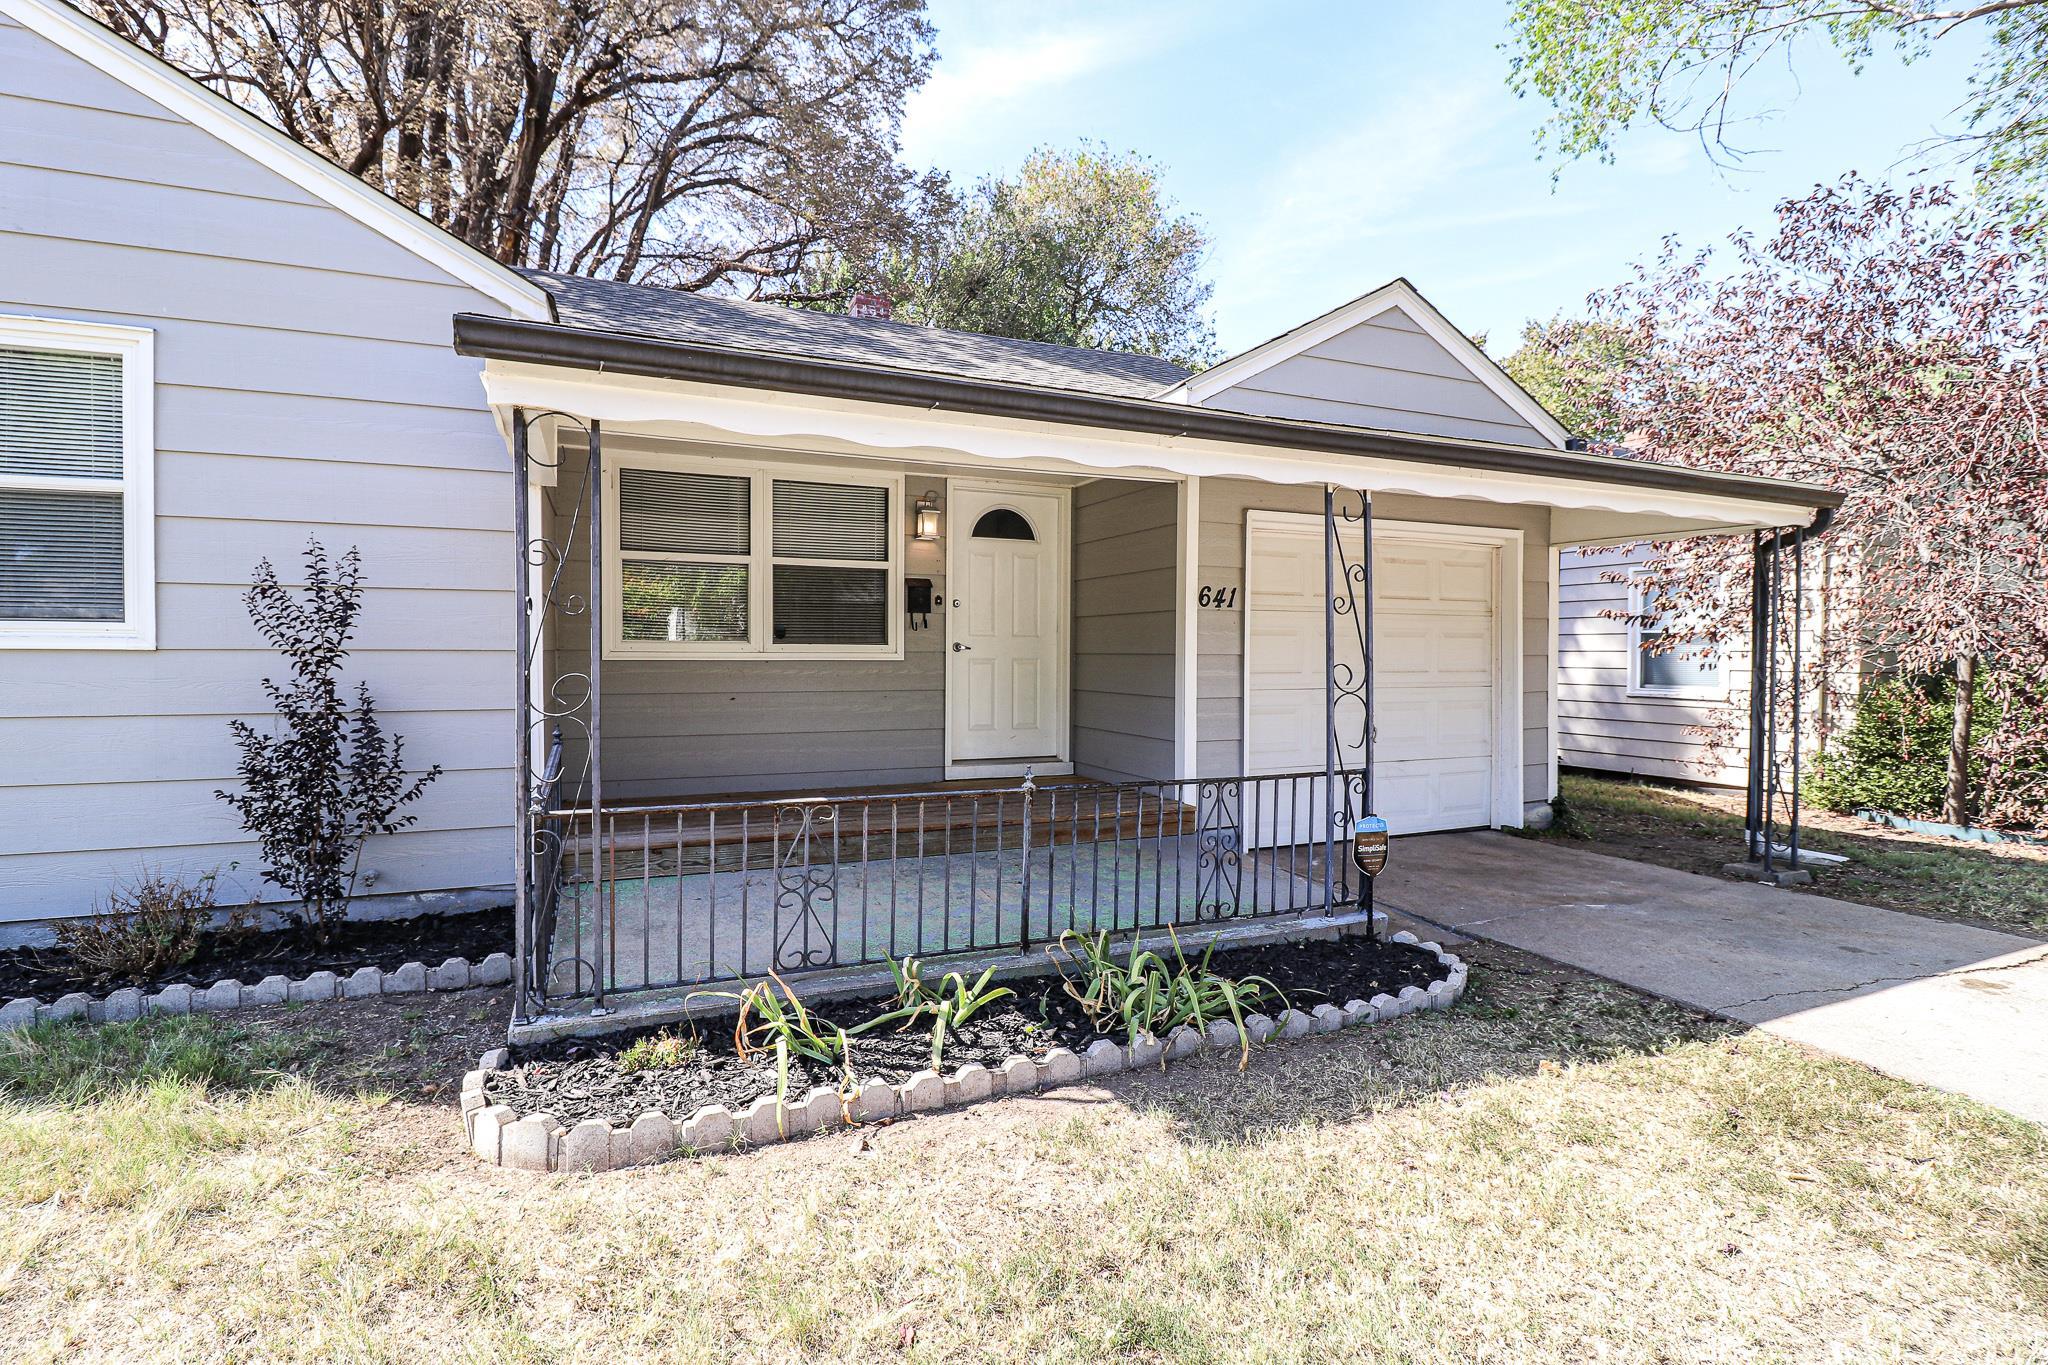 Check out this move-in ready 3 bed, 1 bath home! This one is a charmer, you’ll fall in love with the